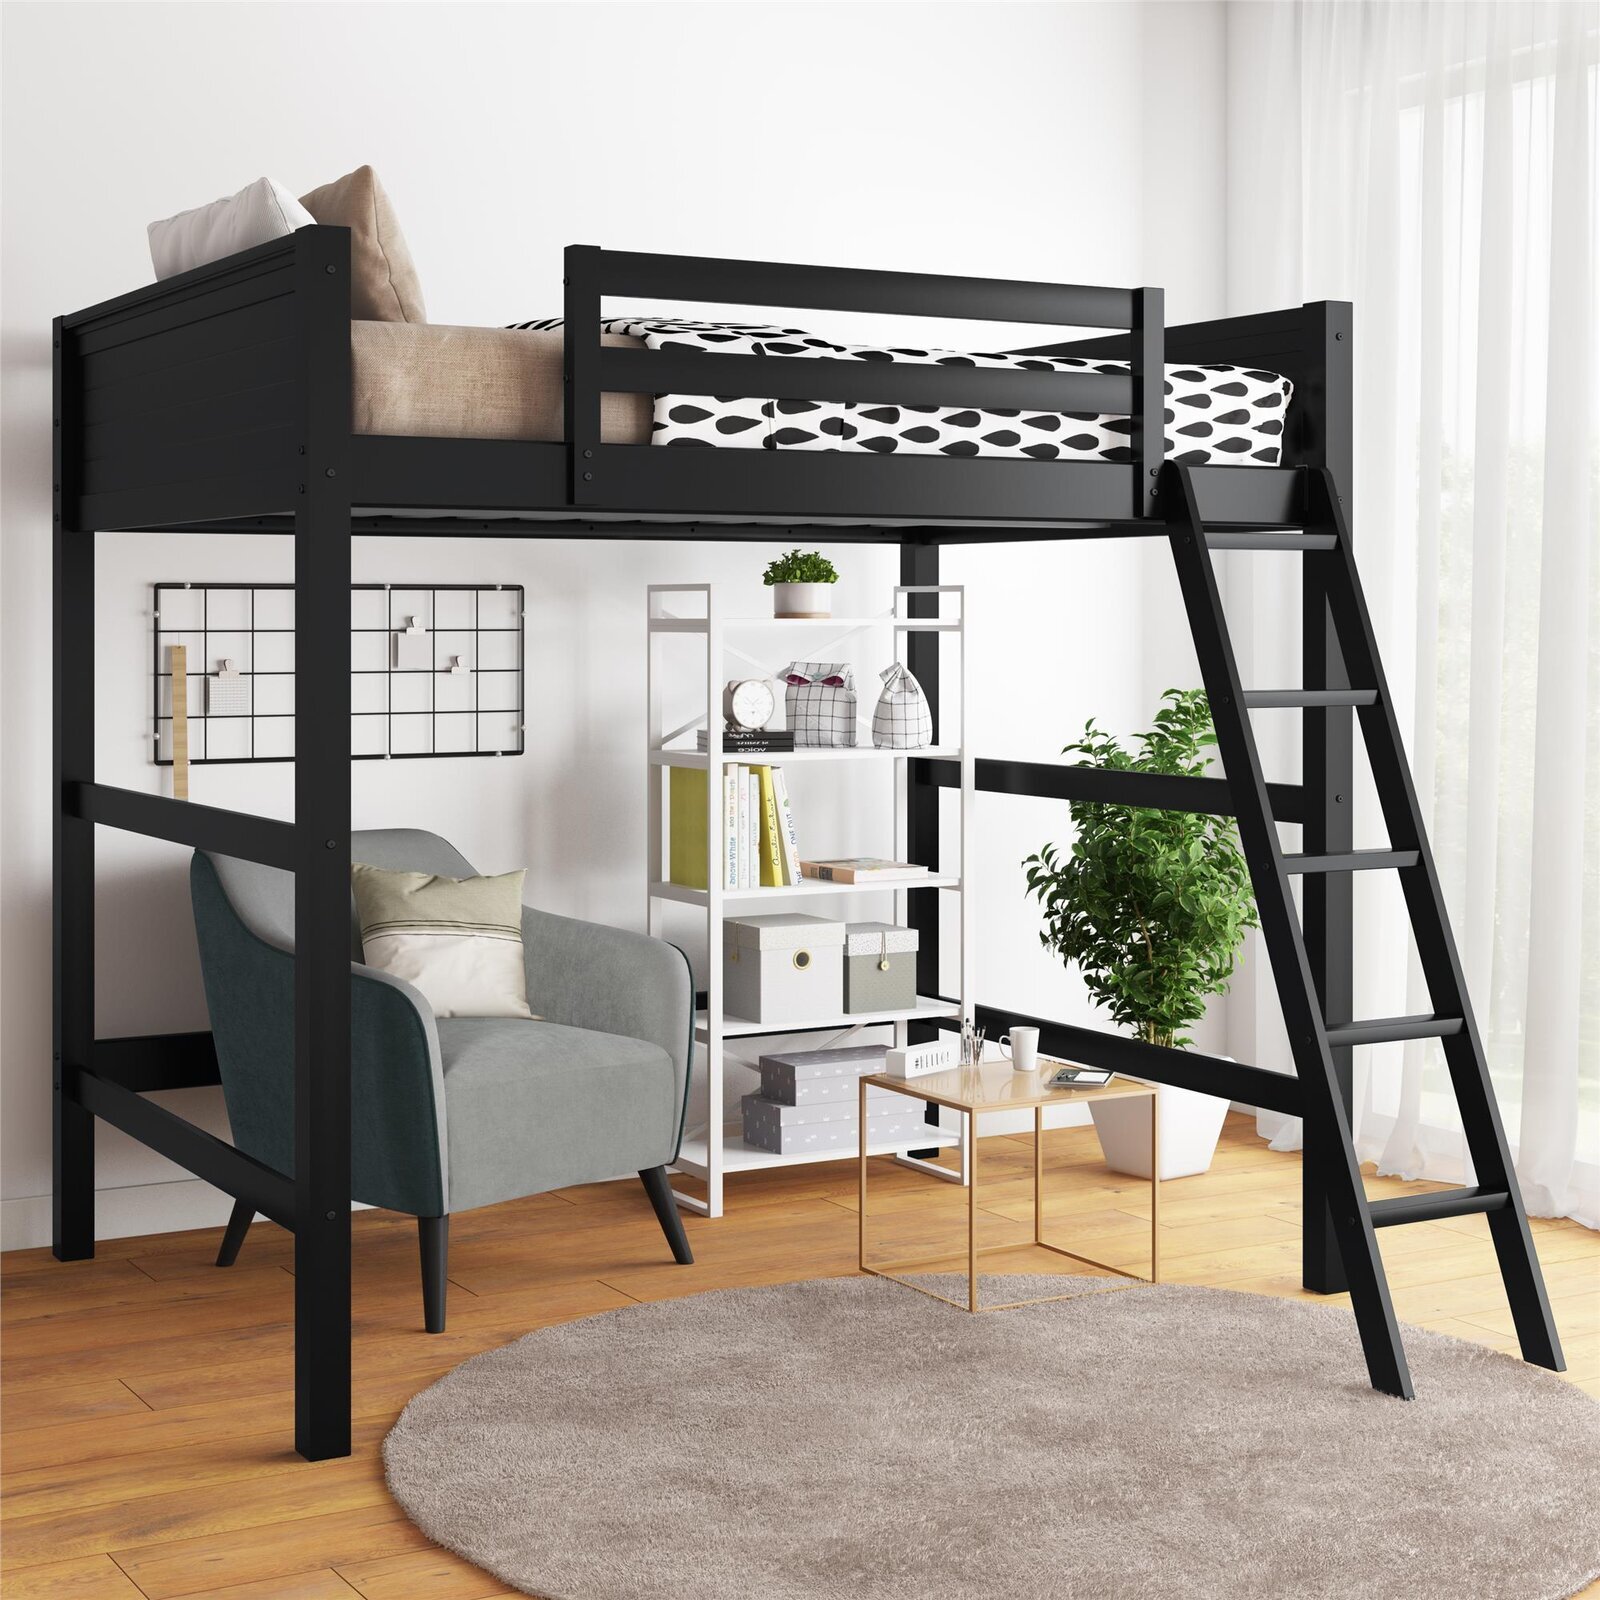 Full Size Bunk Beds With Desk Ideas On Foter